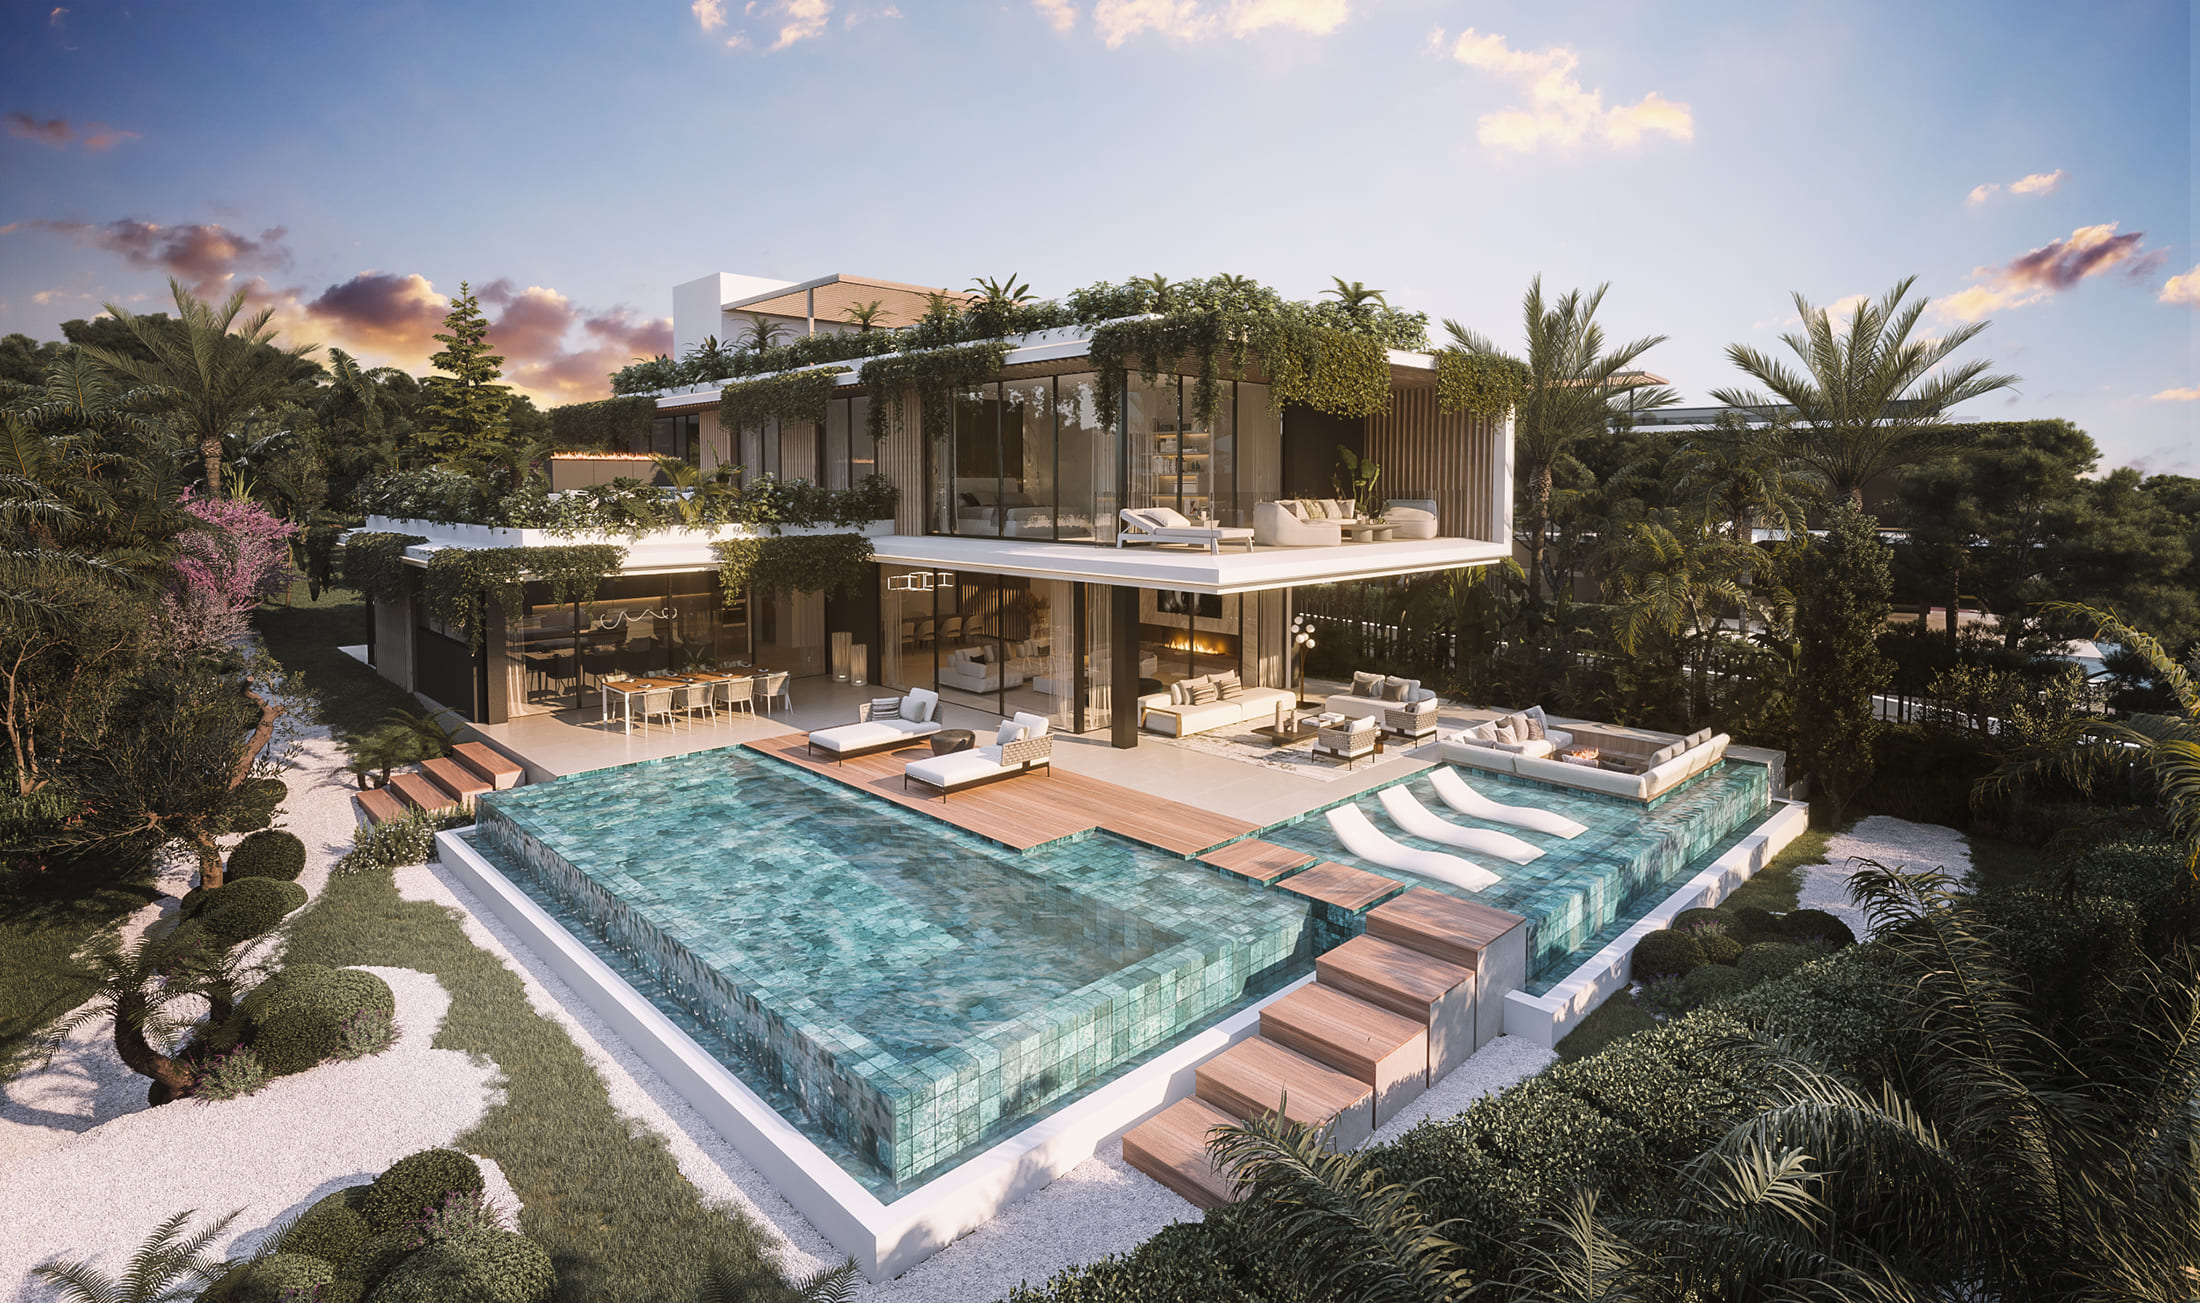 ViVi Real Estate: Spectacular Villa for sale in Marbella with panoramic sea views.